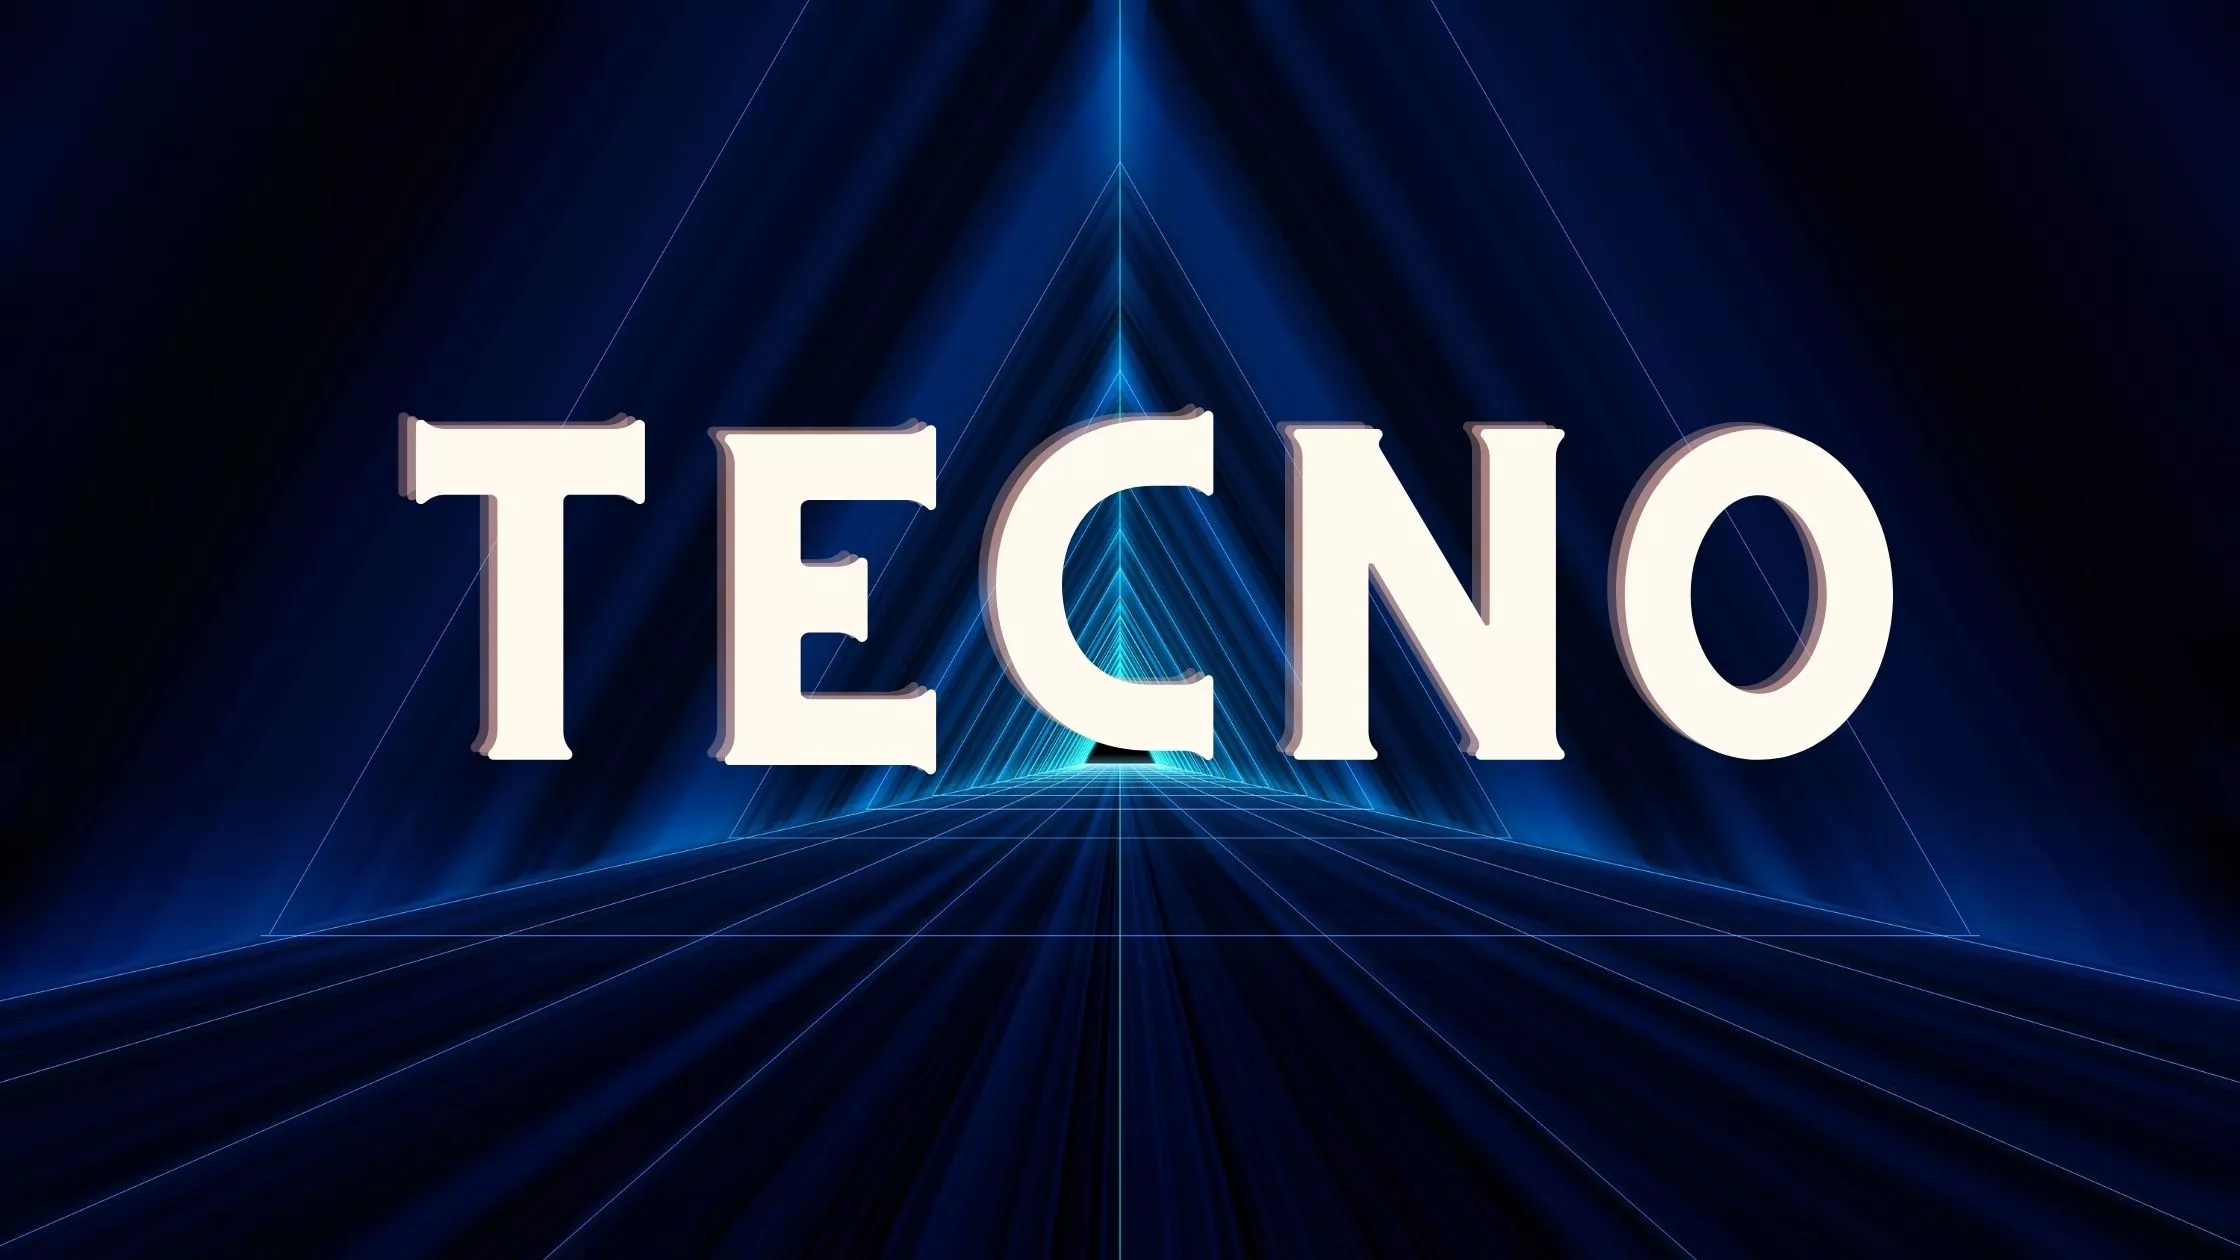 TECNO Premise Studio-Quality Photos With Innovative Imaging Technology